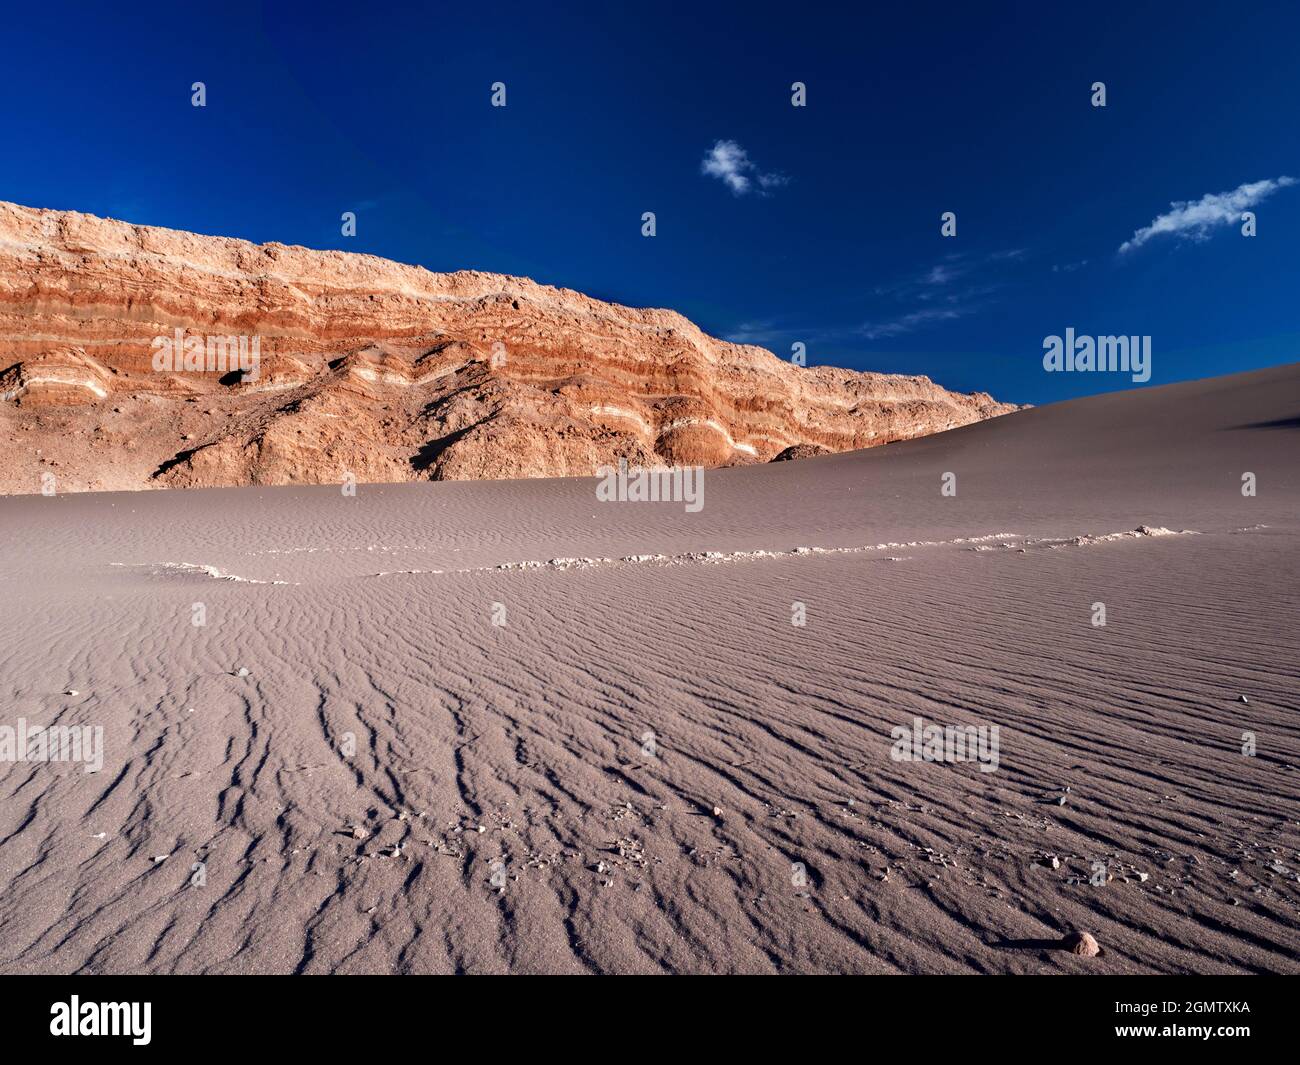 Valley of the Moon, Chile - 26 May 2018   The spectacular El Valle de la Luna (Valley of the Moon) is located in ChileÕs Atacama Desert, the driest pl Stock Photo